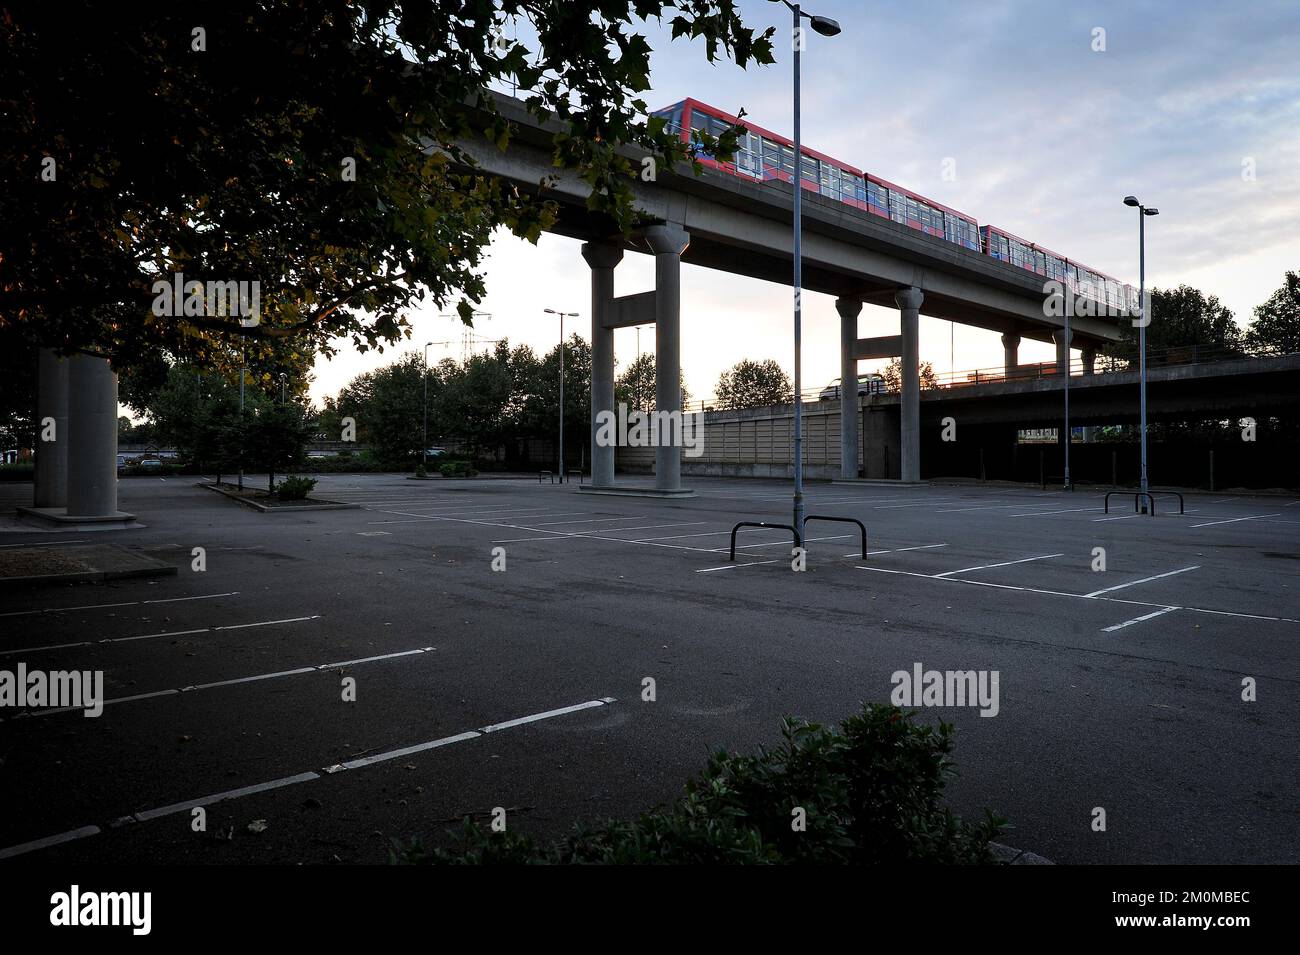 A train on the automated Docklands Light Railway passes over an empty Car park at Dawn in East London. Stock Photo